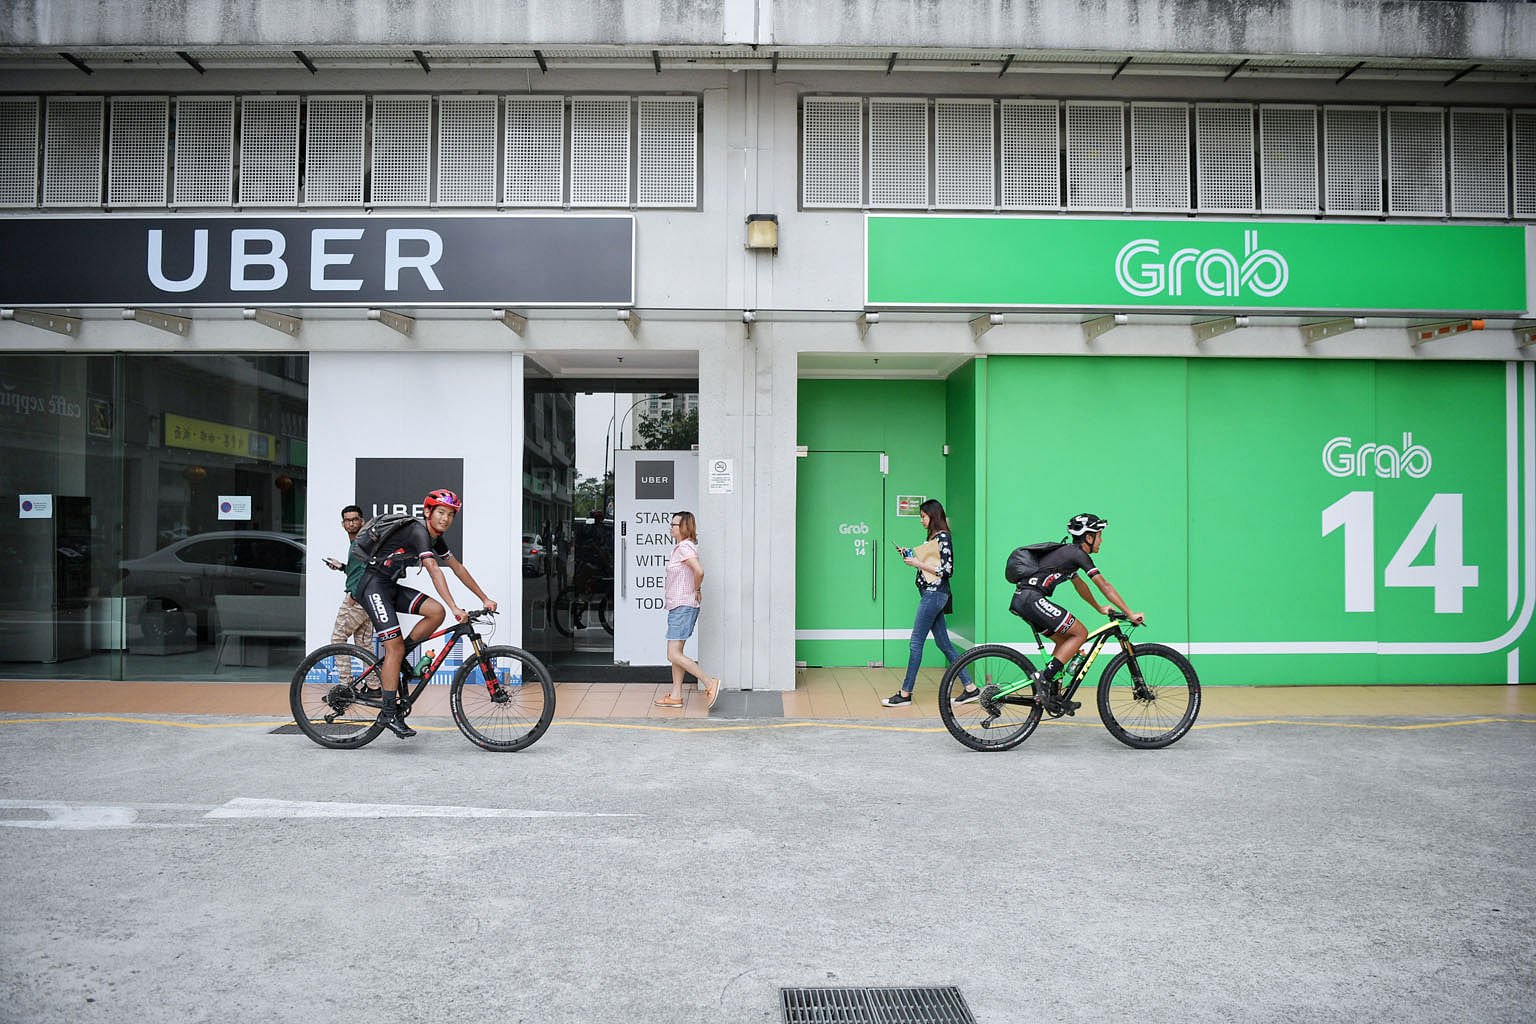 That Grab and Uber failed to notify Singapore's competition watchdog of their "merger" before the deal was closed and implemented raises many questions about their underlying strategic motivations, says the writer.